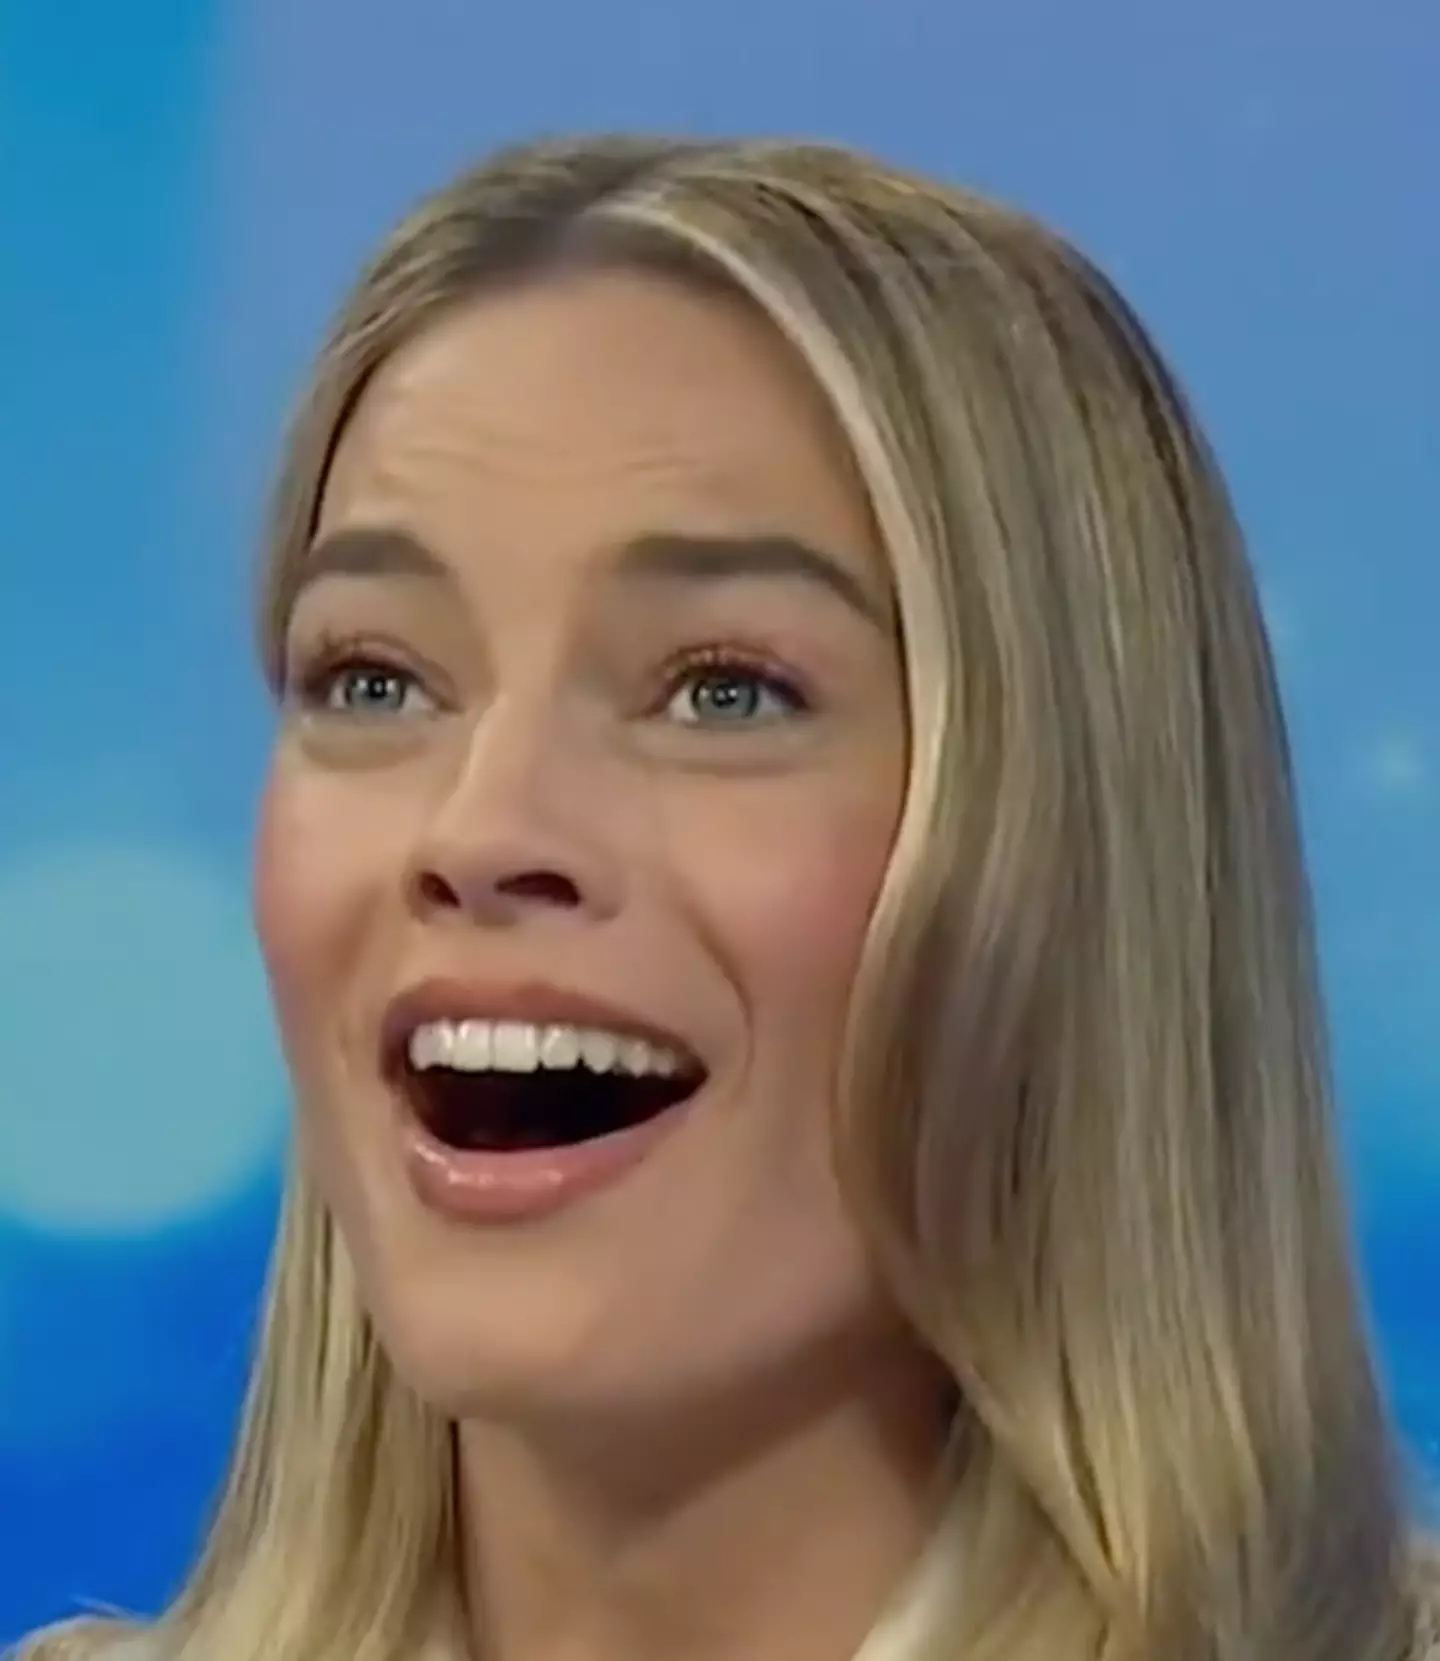 Margot Robbie totally blanked during the interview.